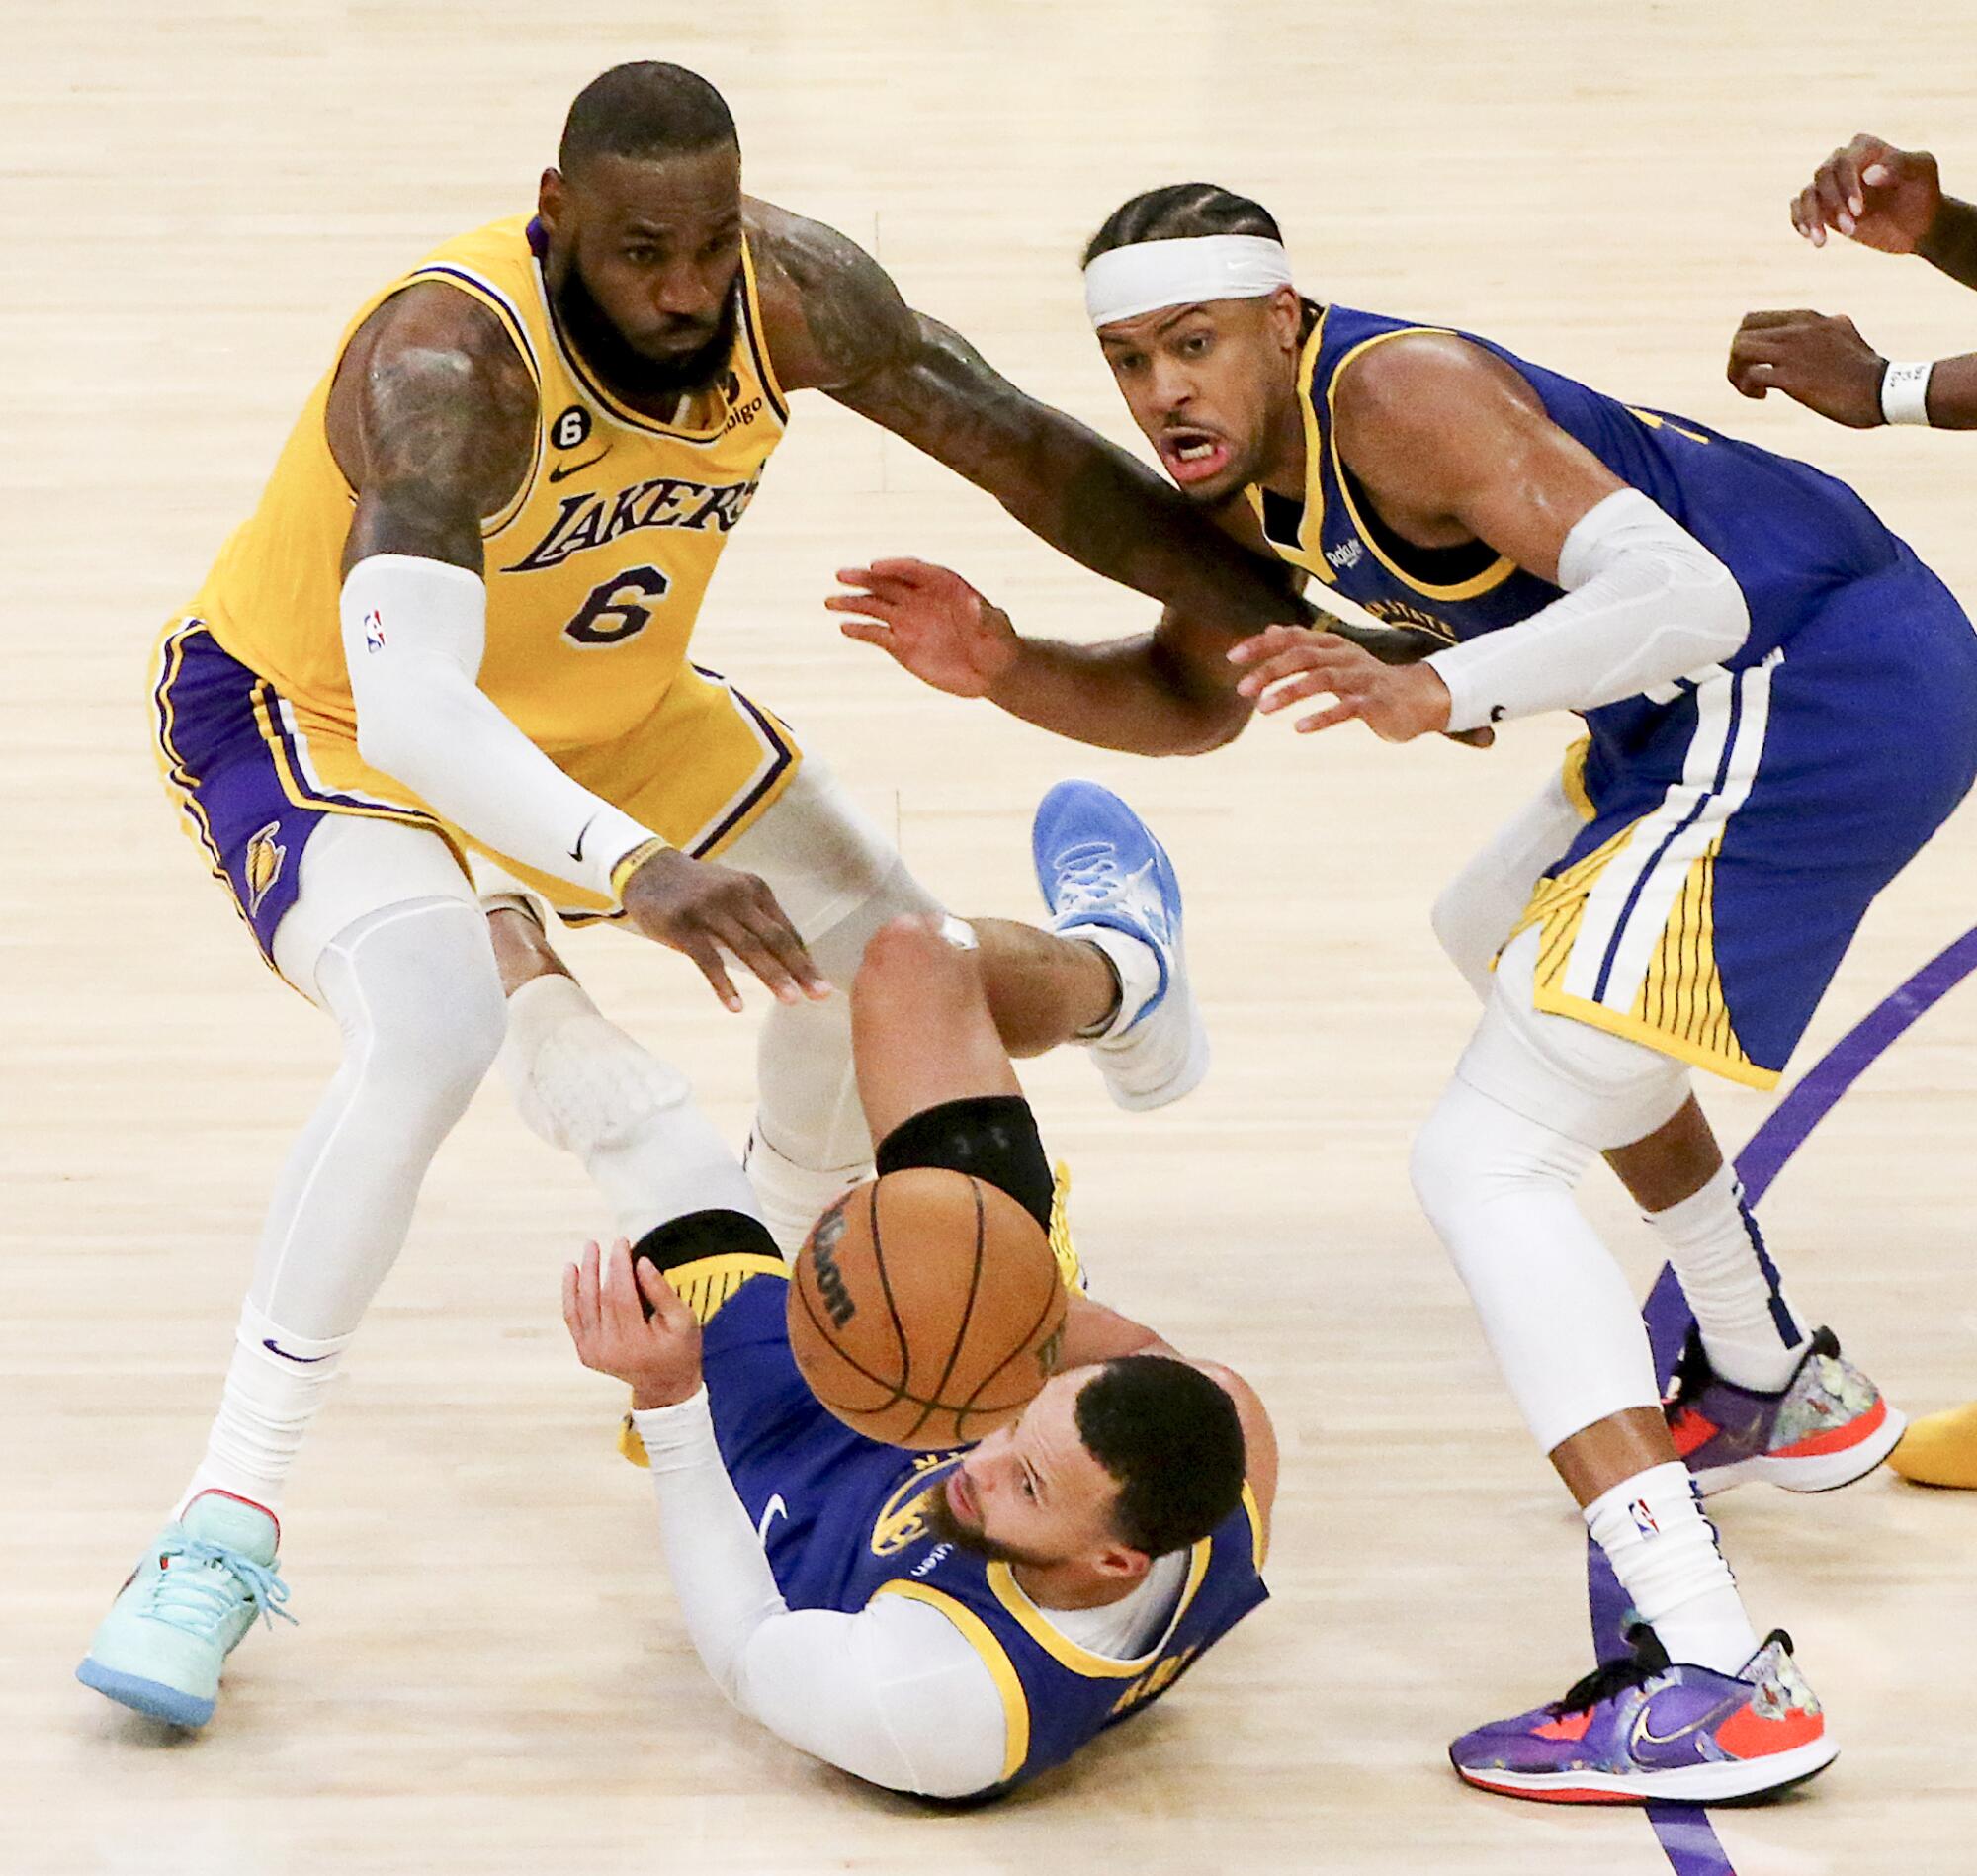 Lakers star LeBron James forces Warriors guard Stephen Curry to turn over the ball.